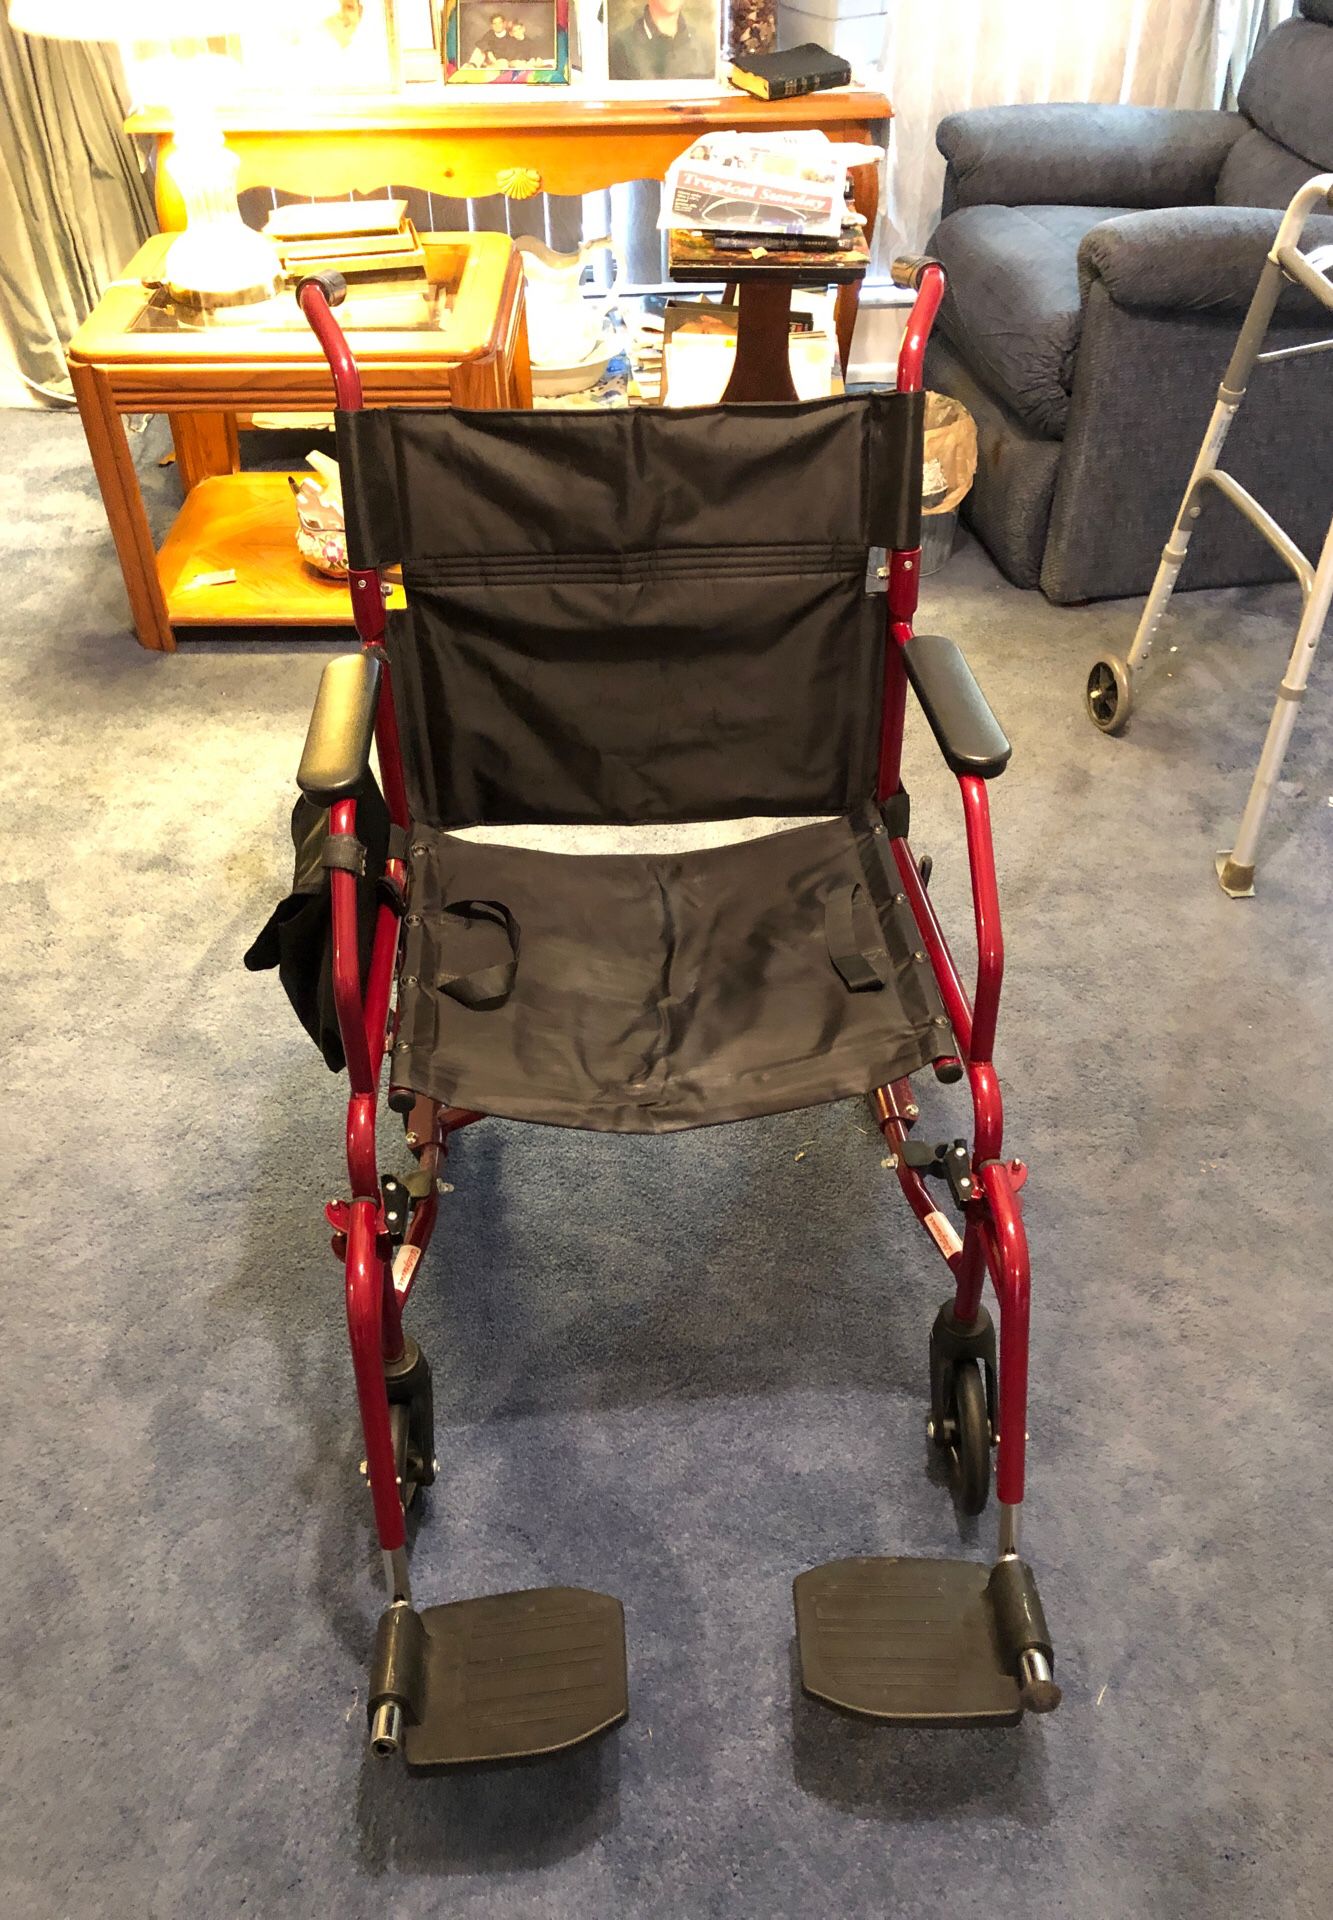 Wheelchair for travel